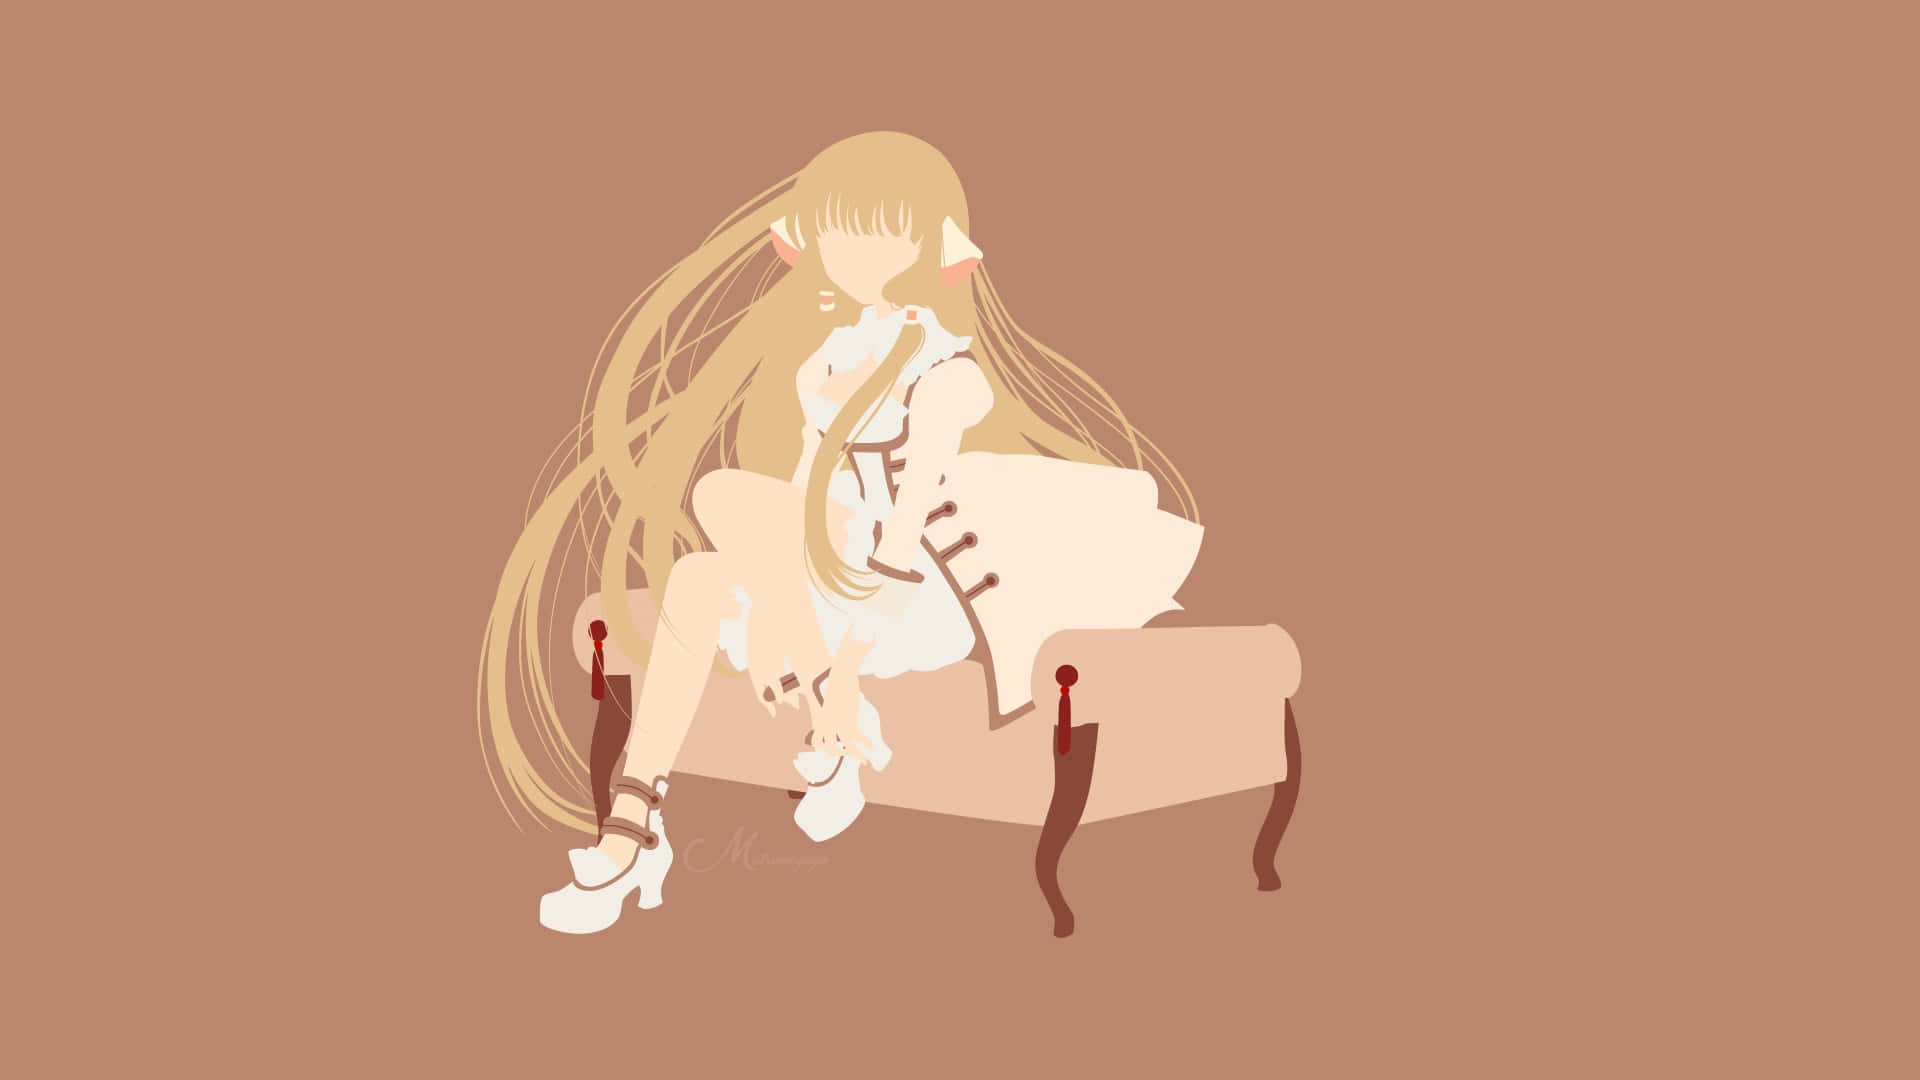 Artistic Illustration Of Chii From Chobits In Vibrant Colors Wallpaper